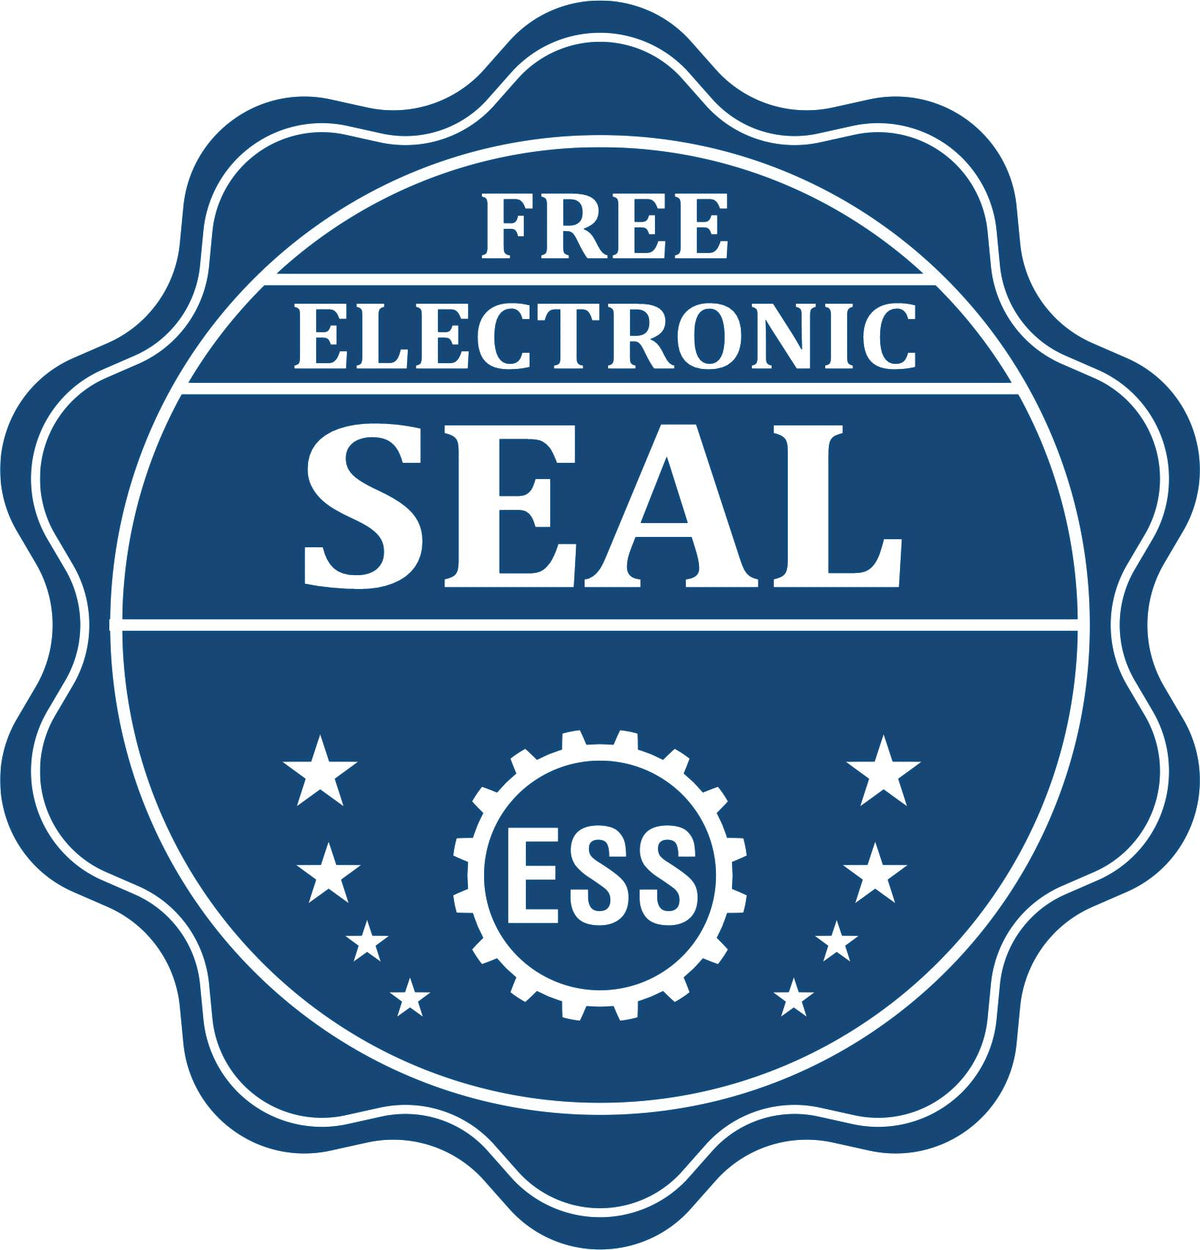 A badge showing a free electronic seal for the Gift Rhode Island Architect Seal with stars and the ESS gear on the emblem.